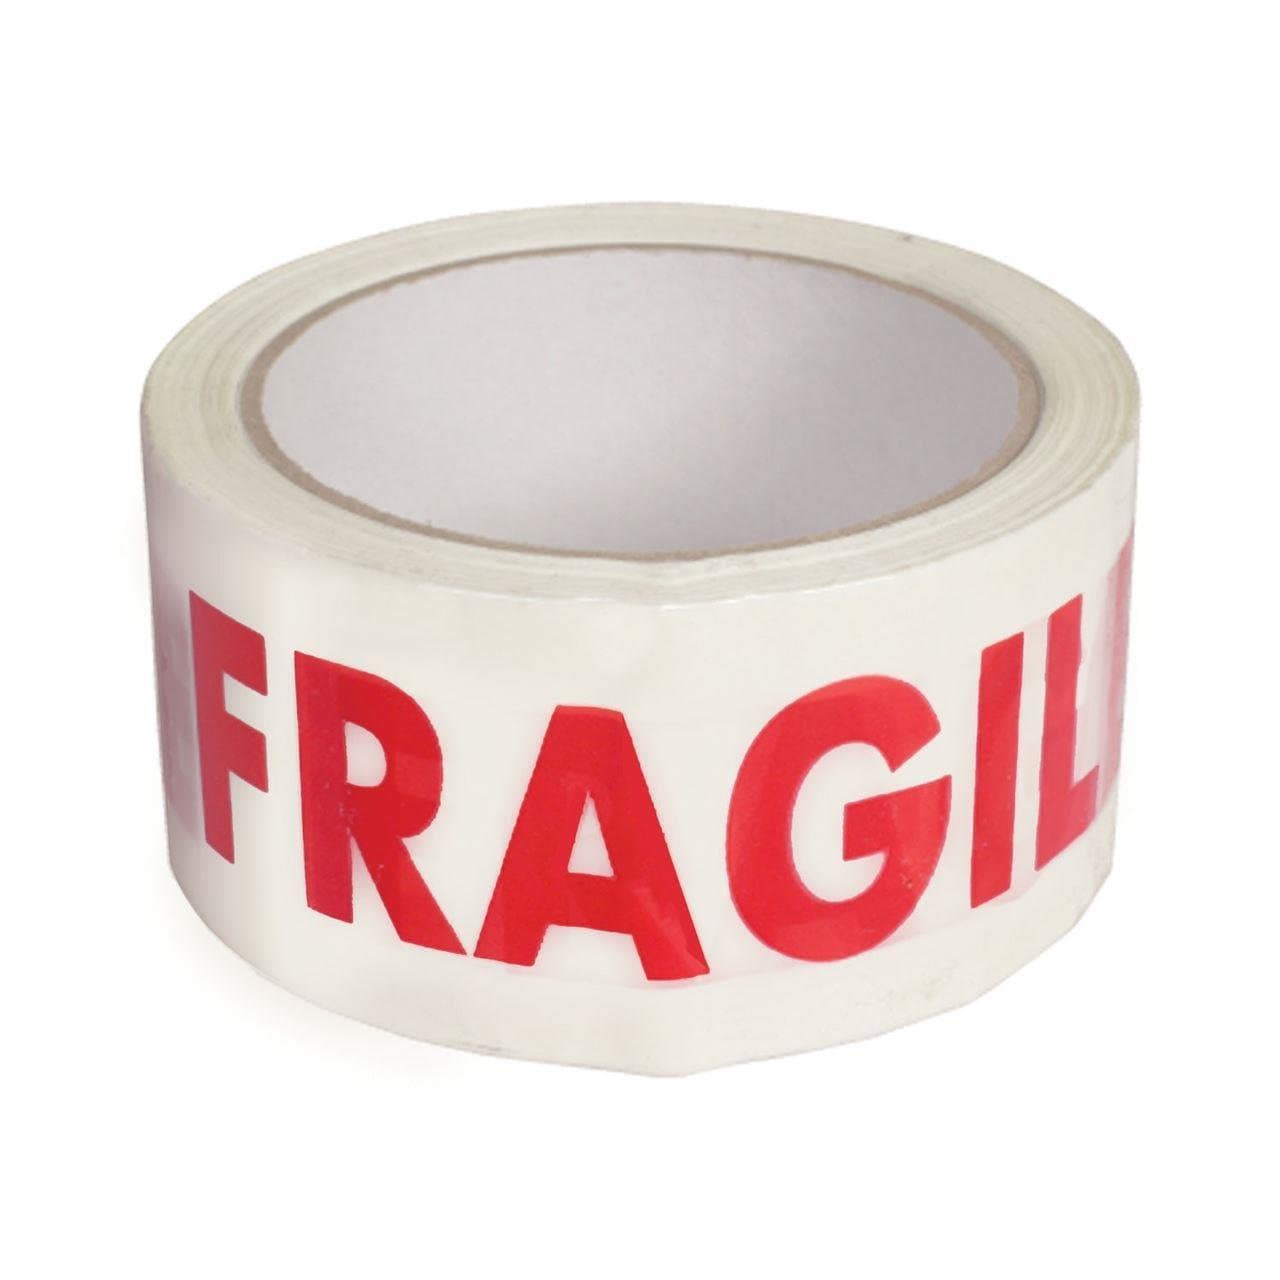 FRAGILE Parcel For Packaging Boxes Carton Sealing Packing Tape 48mm x 66m 